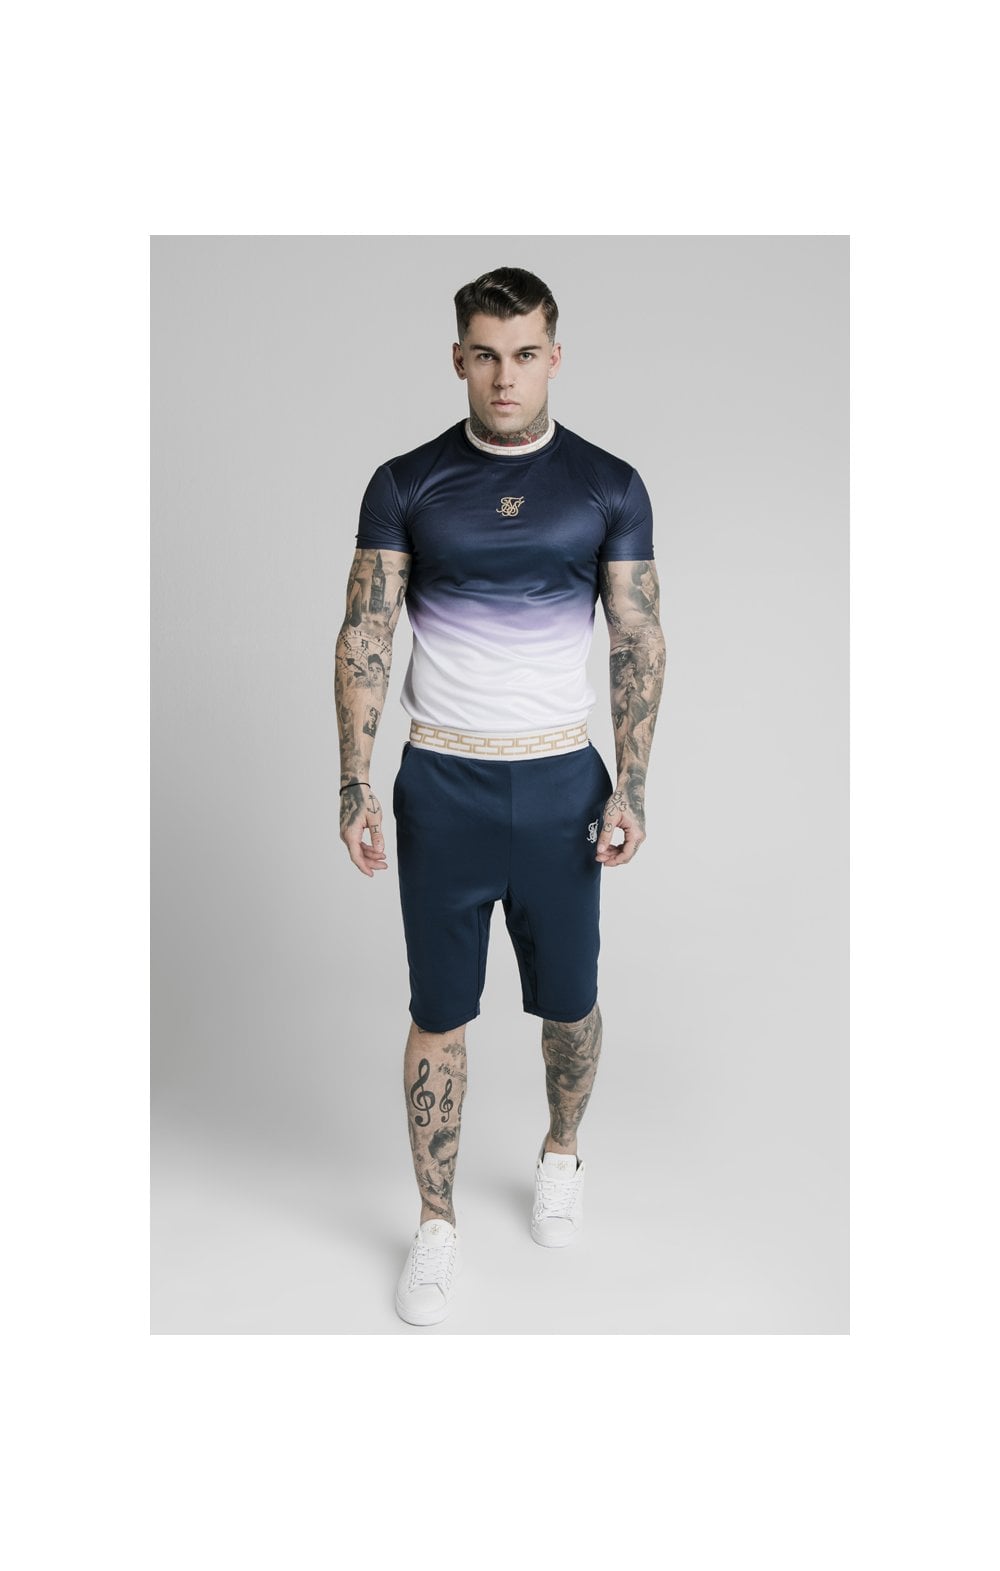 SikSilk S/S Fade Inset Tape Gym Tee - Navy & White (4)